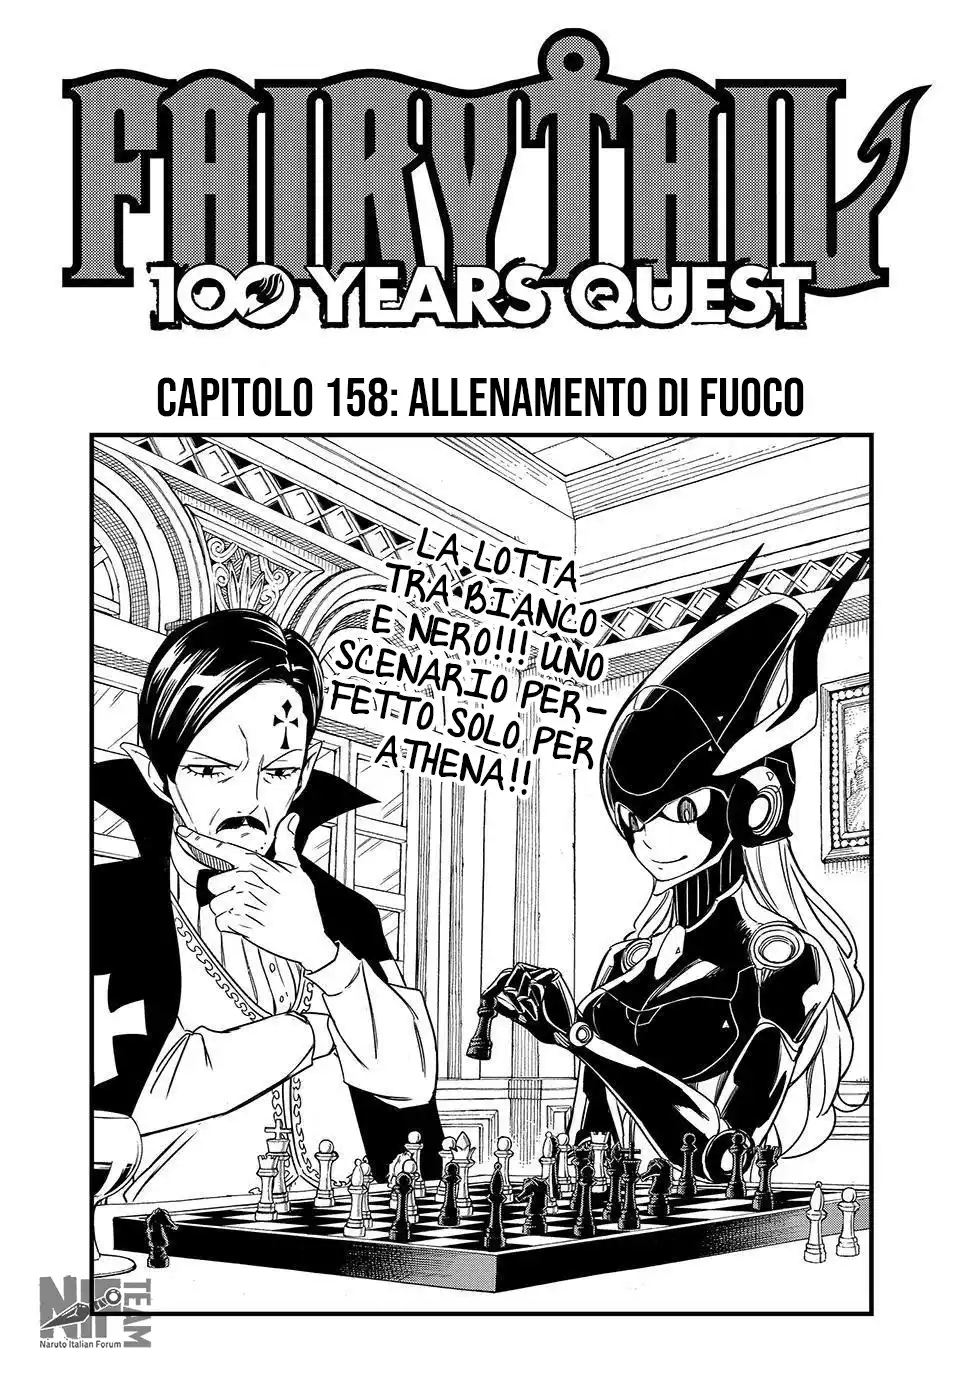 Fairy Tail: 100 Years Quest Capitolo 158 page 1